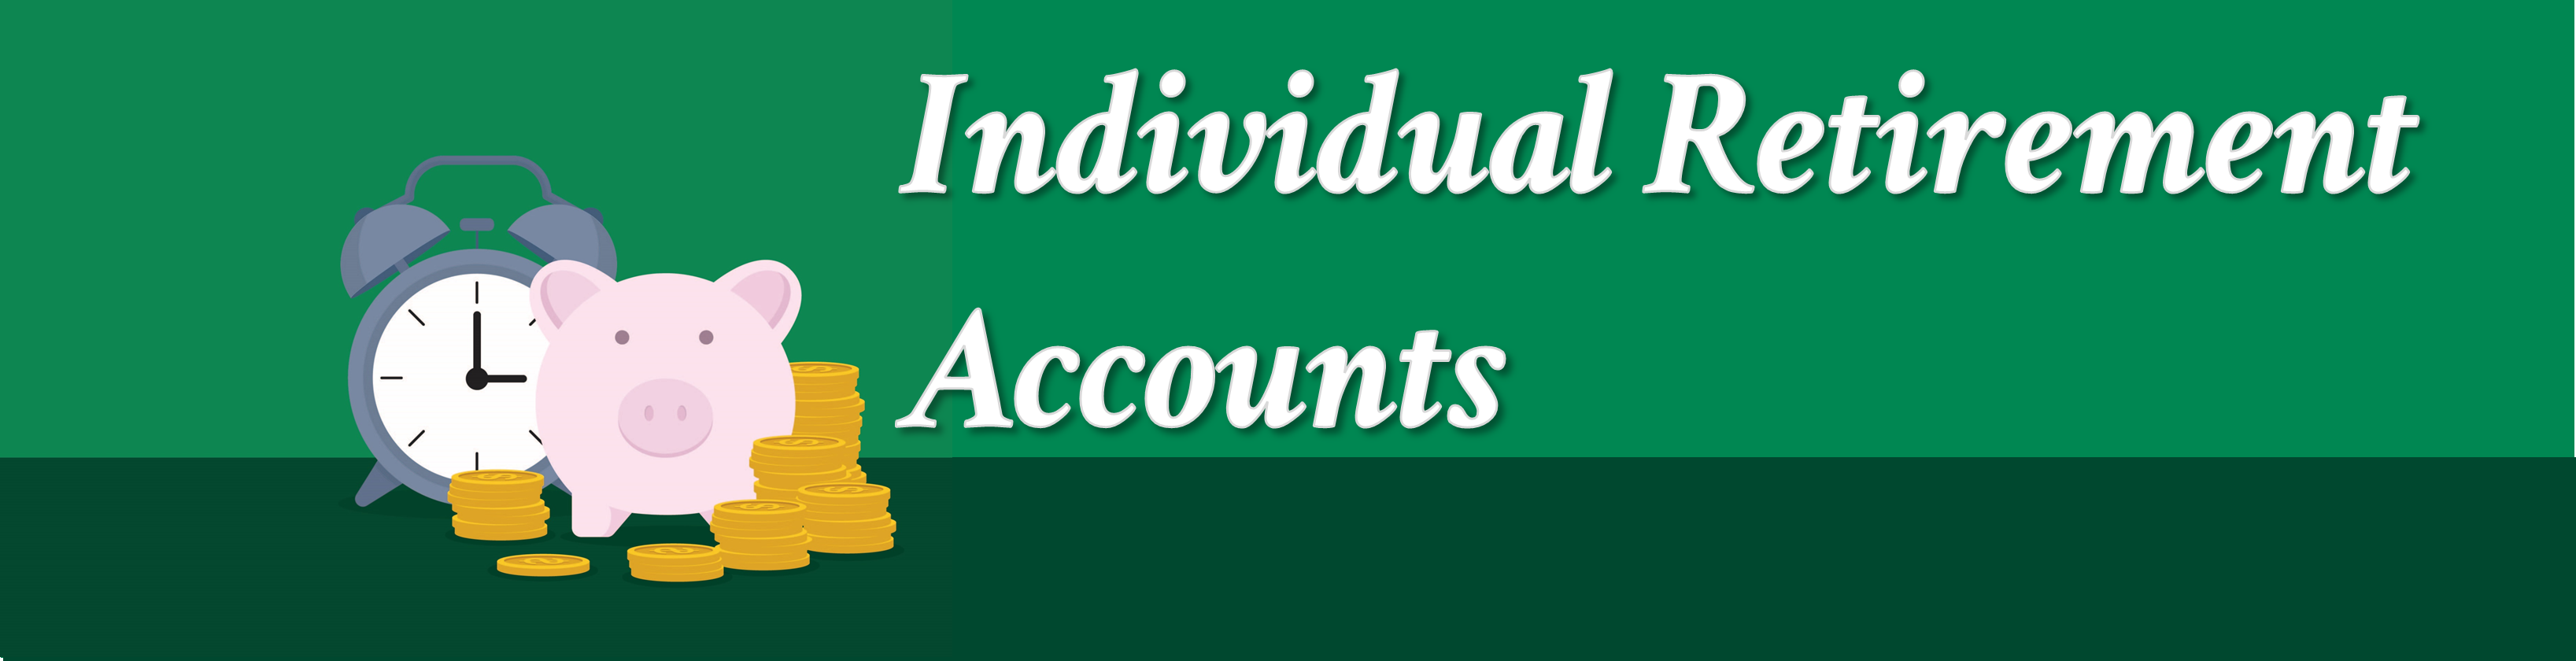 Personal IRA Banner